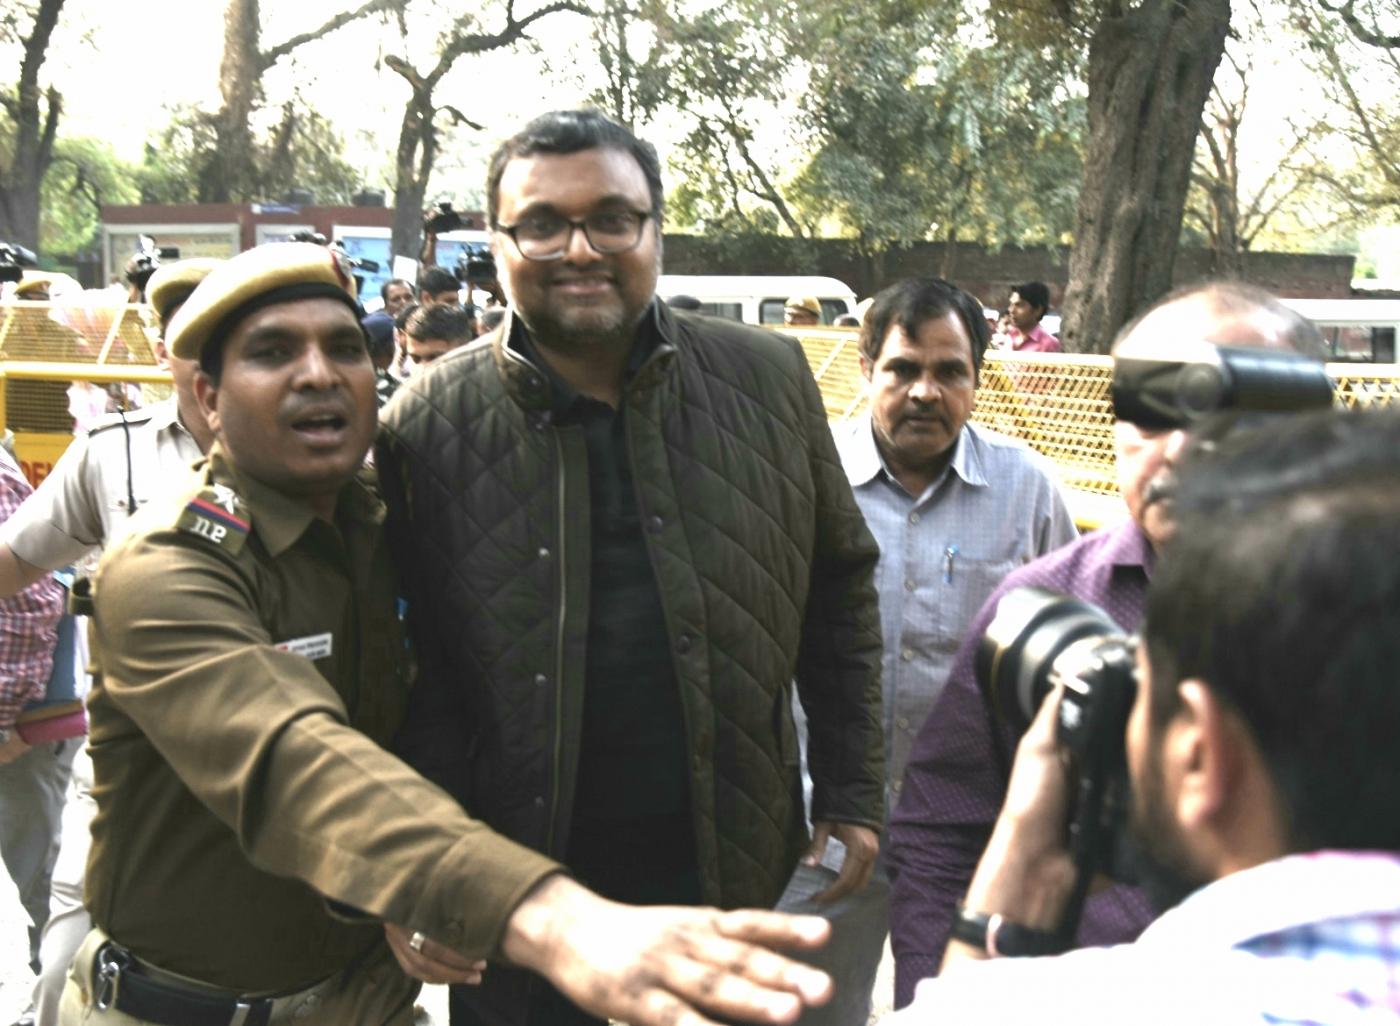 New Delhi: Karti Chidambaram, son of former Finance Minister P. Chidambaram who was arrested by the CBI from Chennai in connection with its ongoing probe into the INX media case, being taken to be produced at Patiala House Court in New Delhi on Feb 28, 2018. (Photo: IANS) by .